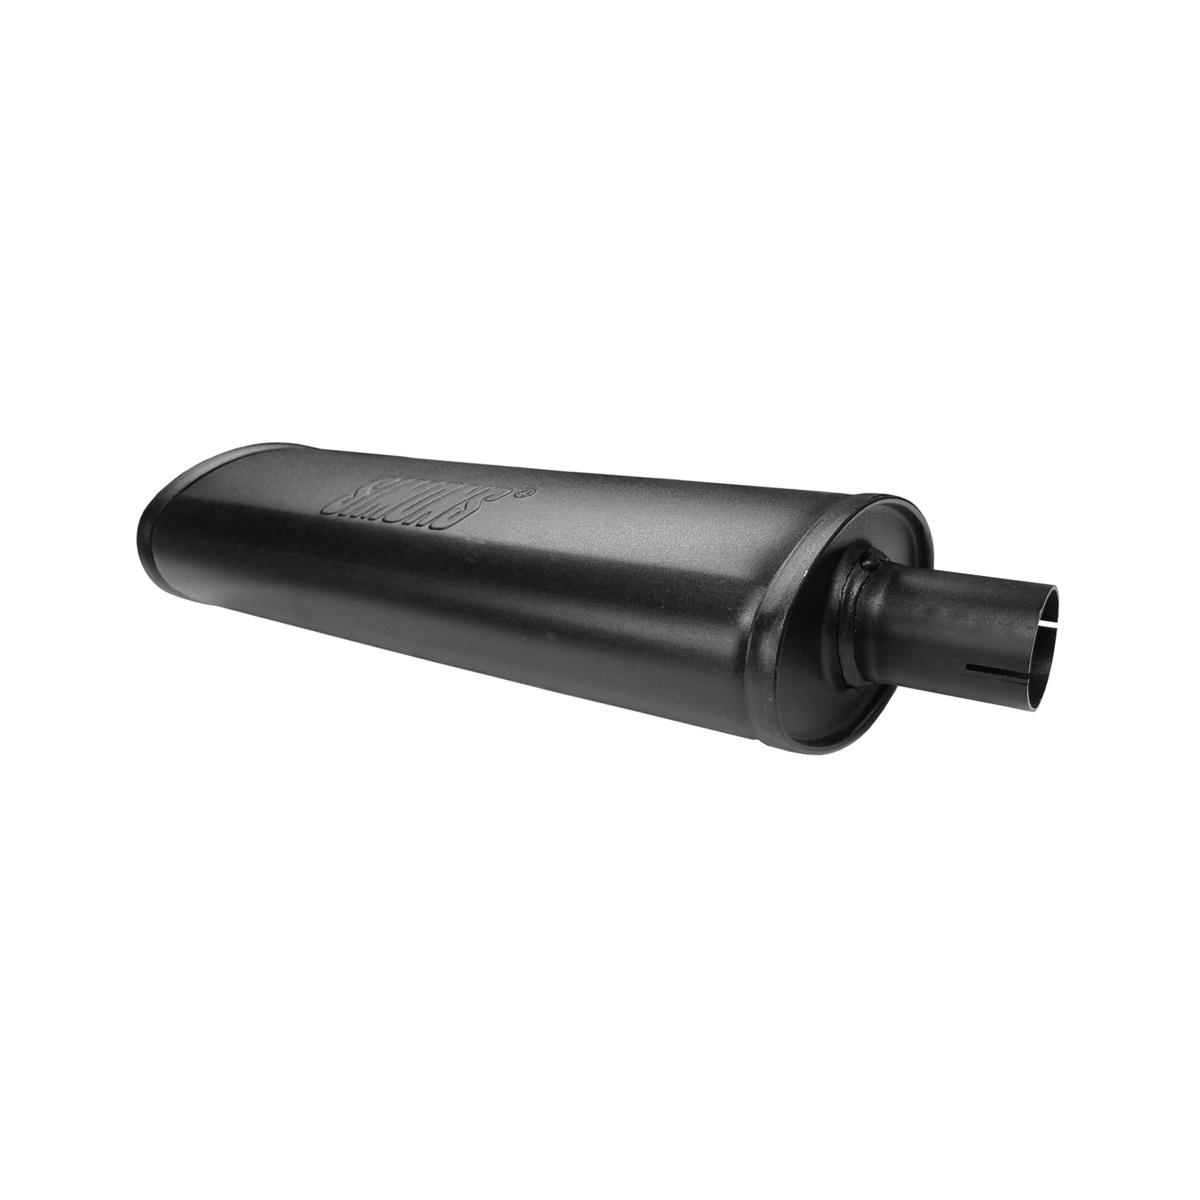 Jetex Small Oval Silencer 320mm Long 2.25 Inch